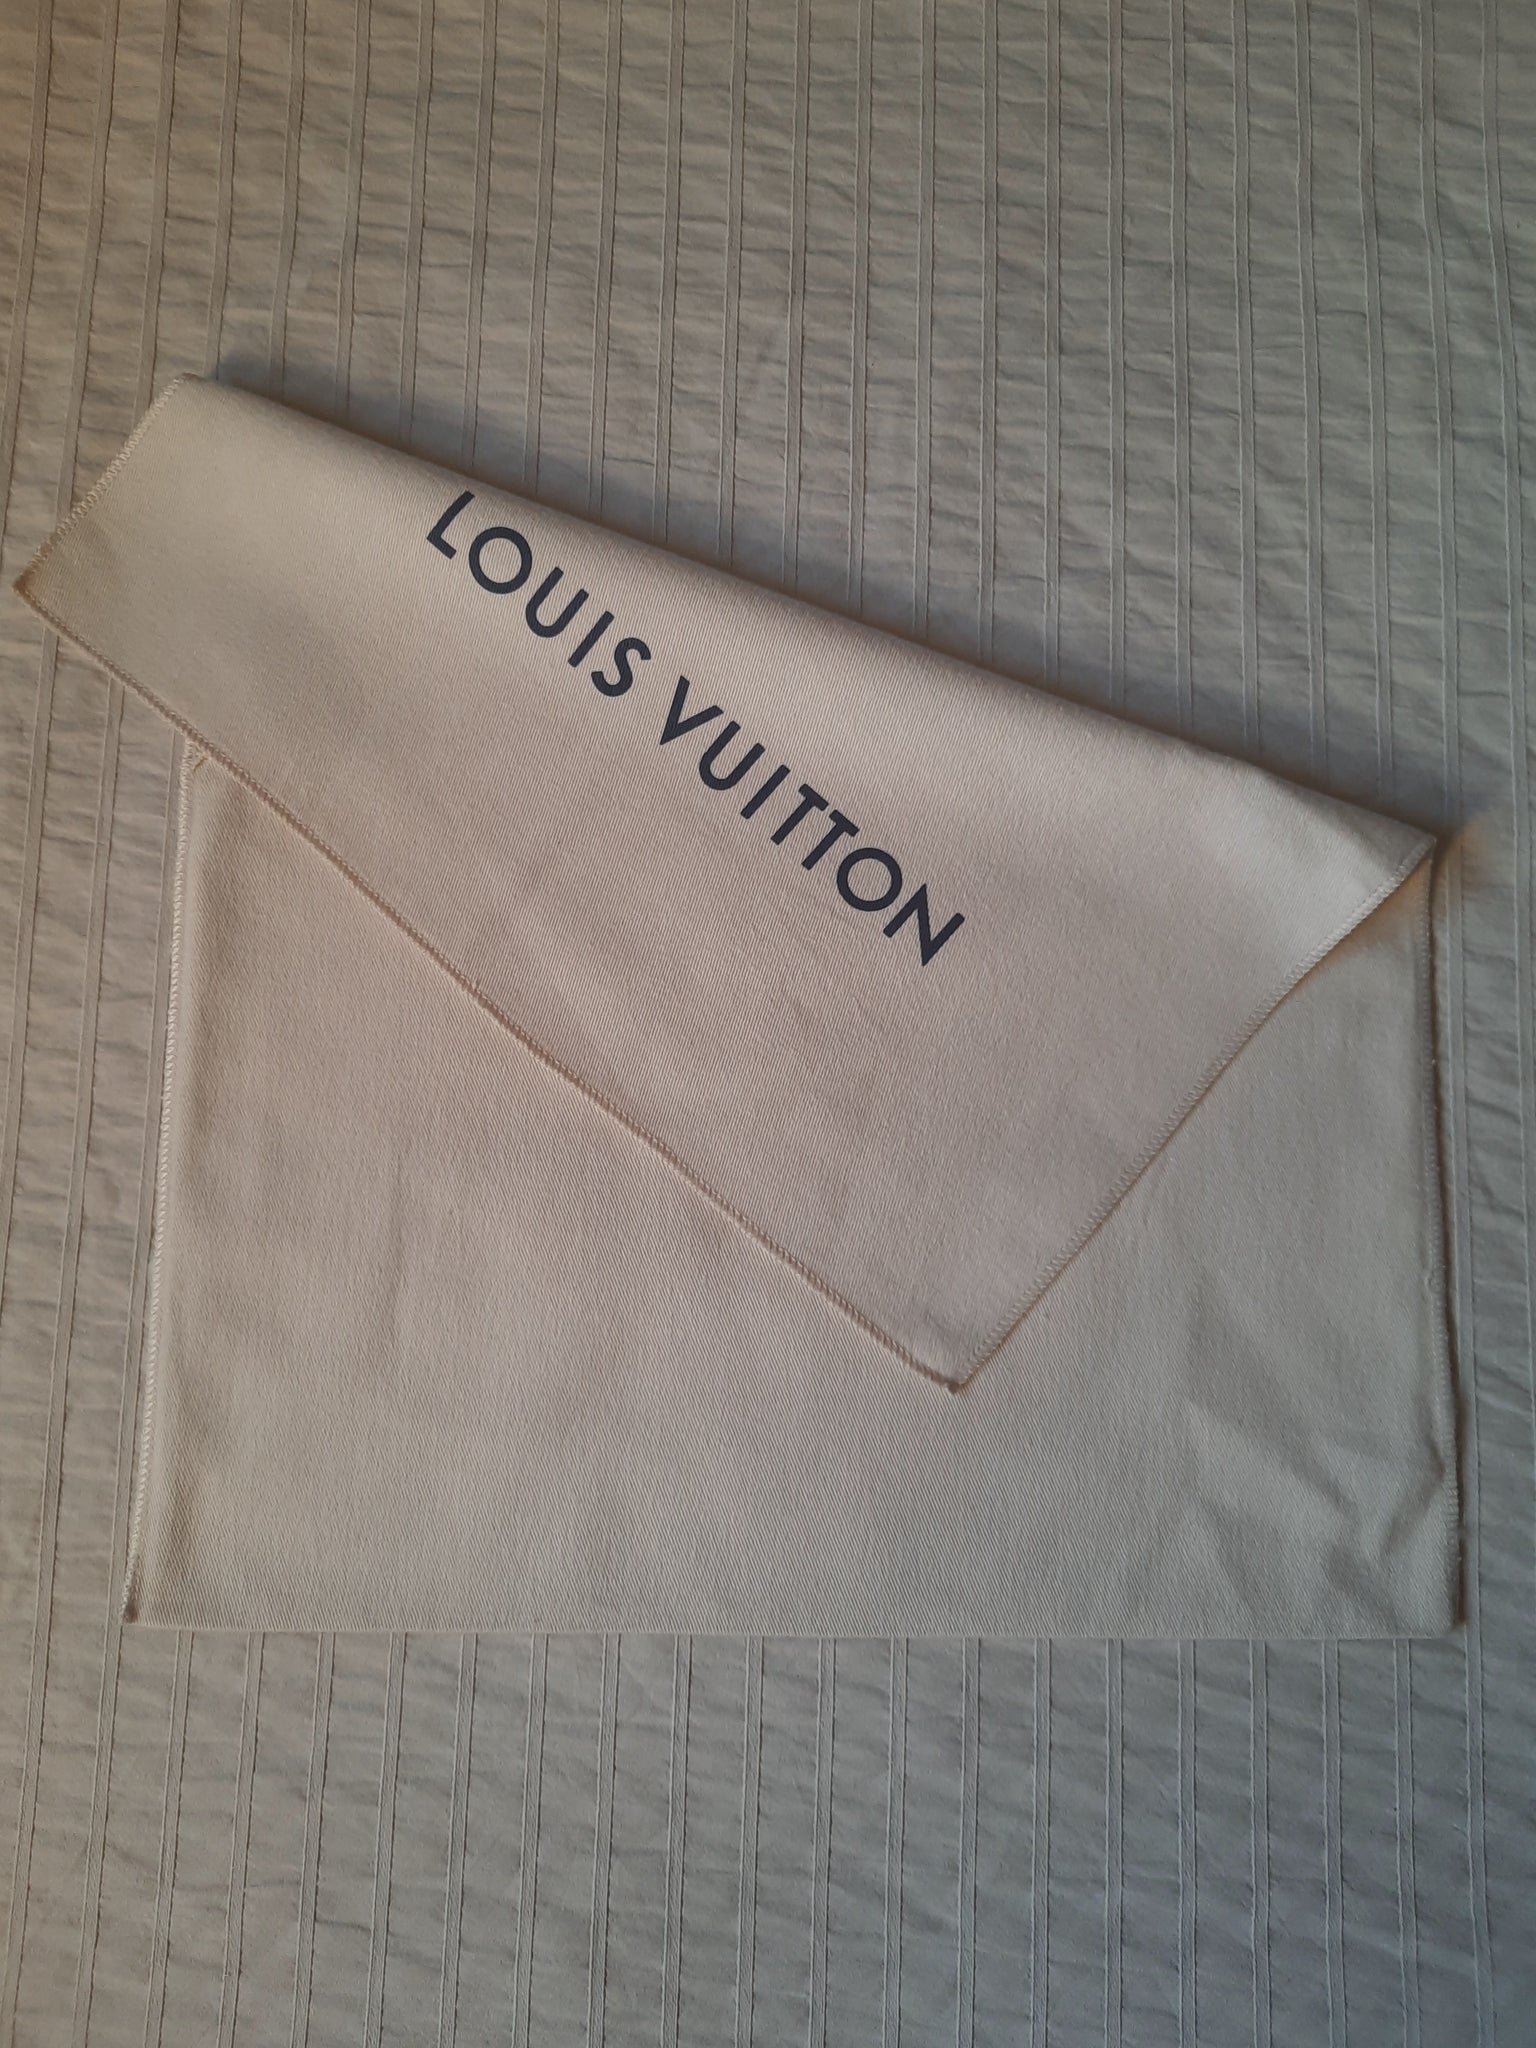 080 Pre-owned Authentic Louis Vuitton Dust Bag Fit for Alma –  Thriftinghills LLC